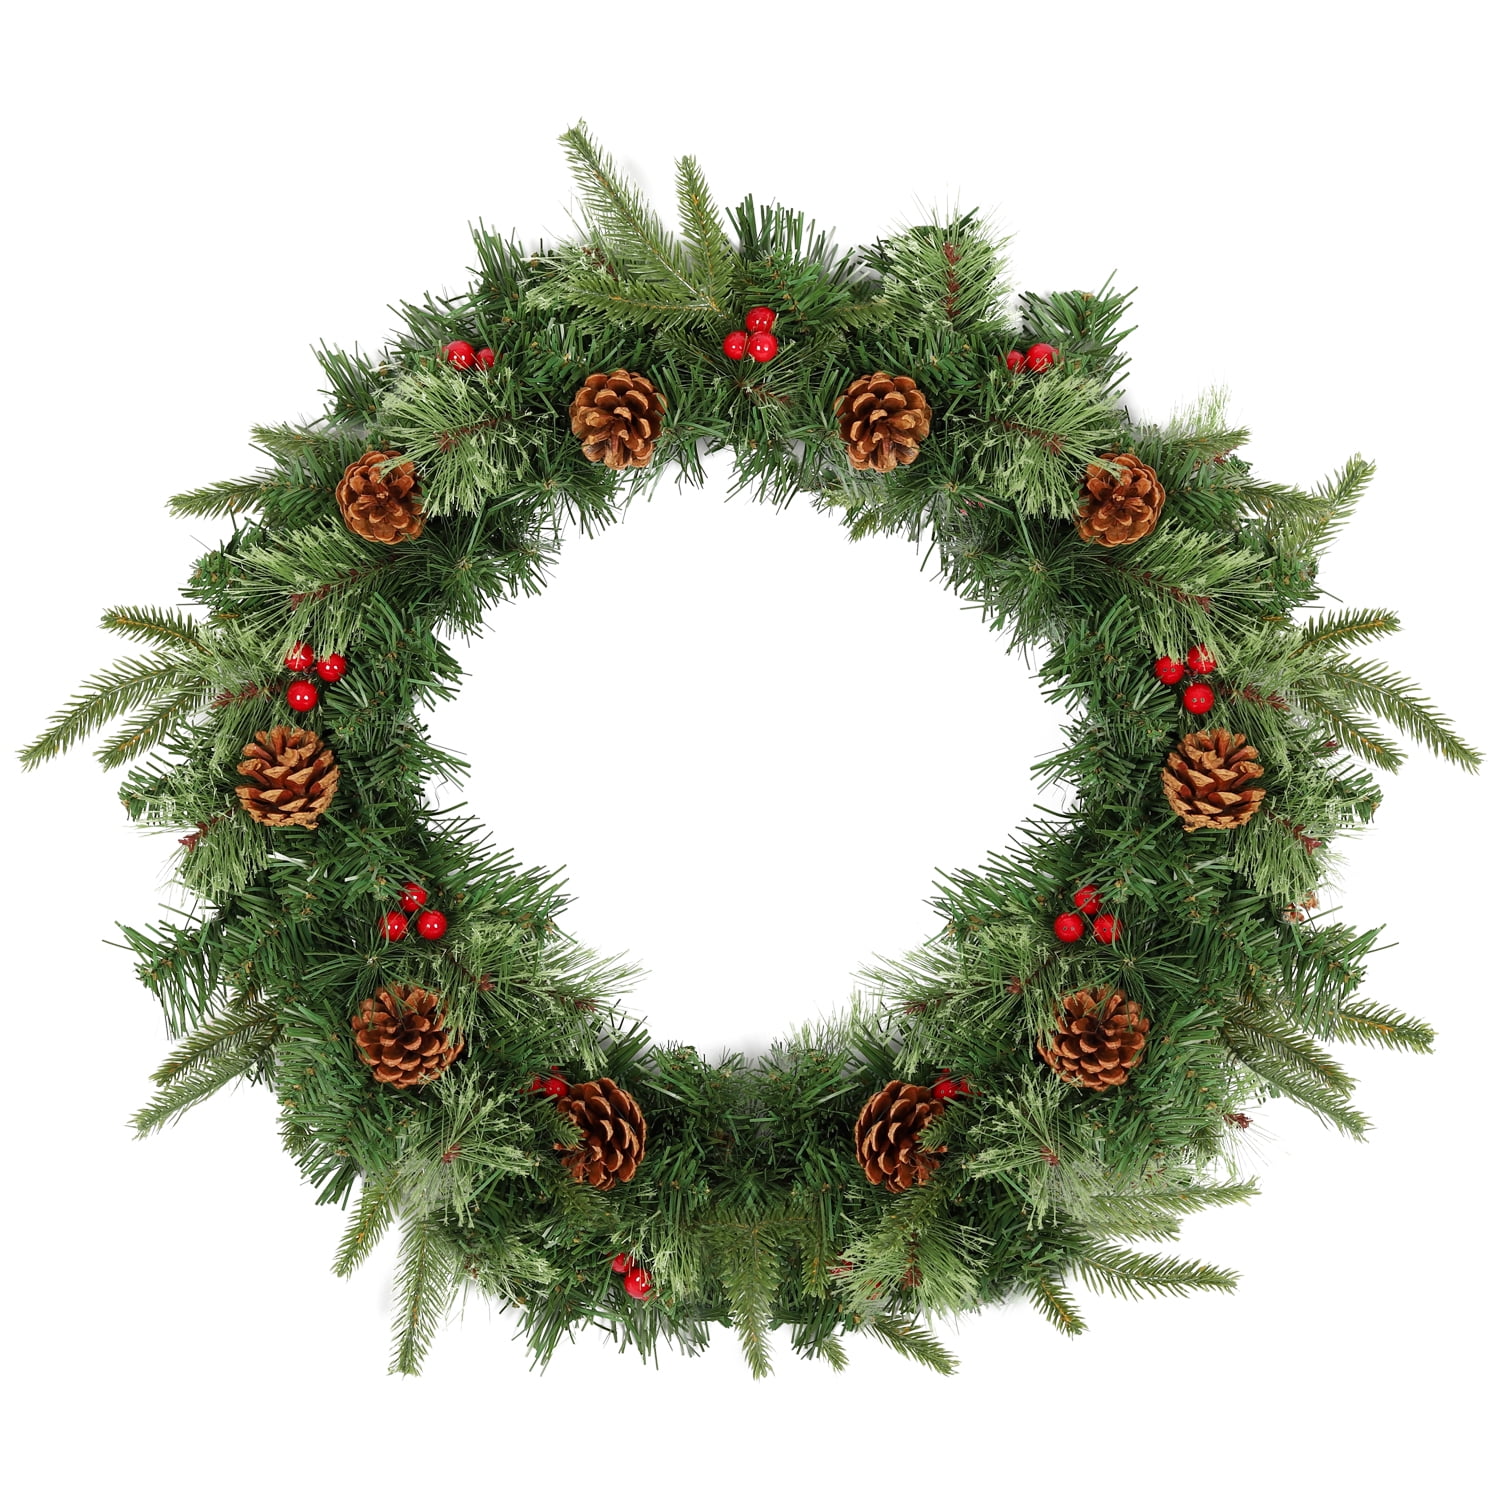 Details about   24" Christmas Spruce Pine Cone Wreath with LED & Door Hanger XMS Decor Ornaments 